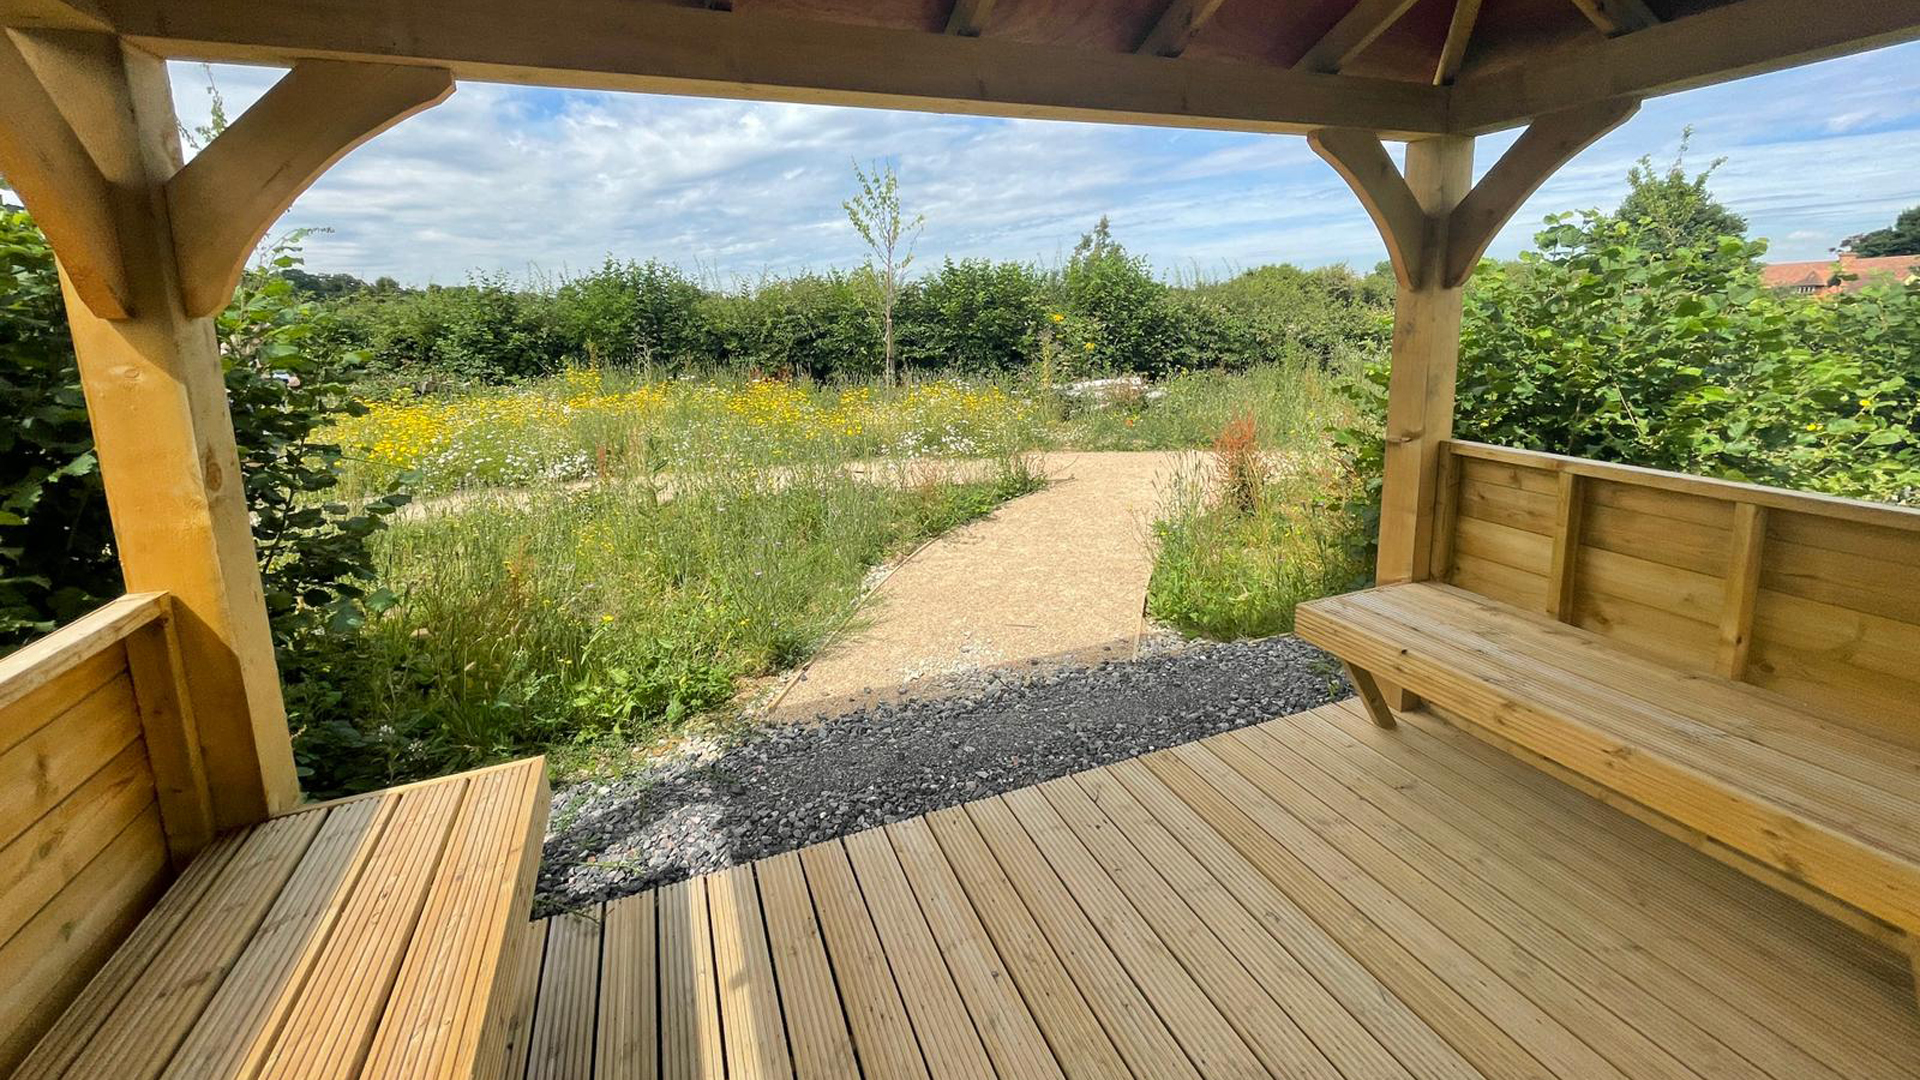 wooden gazebo seating area surrounded by wildflower and winding path